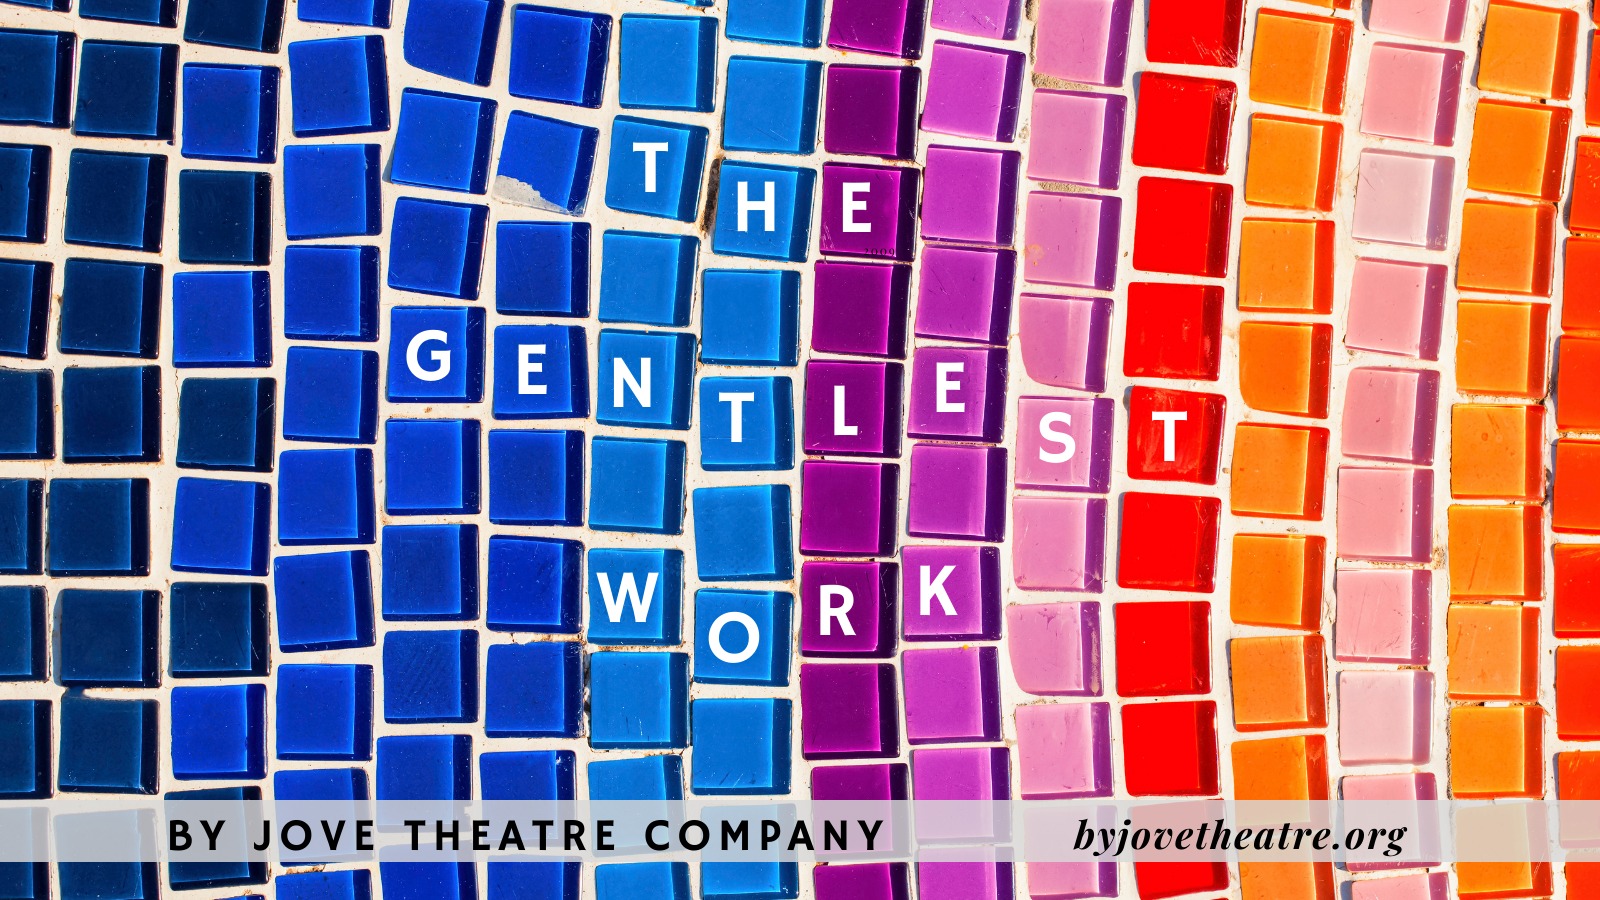 Figure 4. Poster for By Jove Theatre Company’s The Gentlest Work.